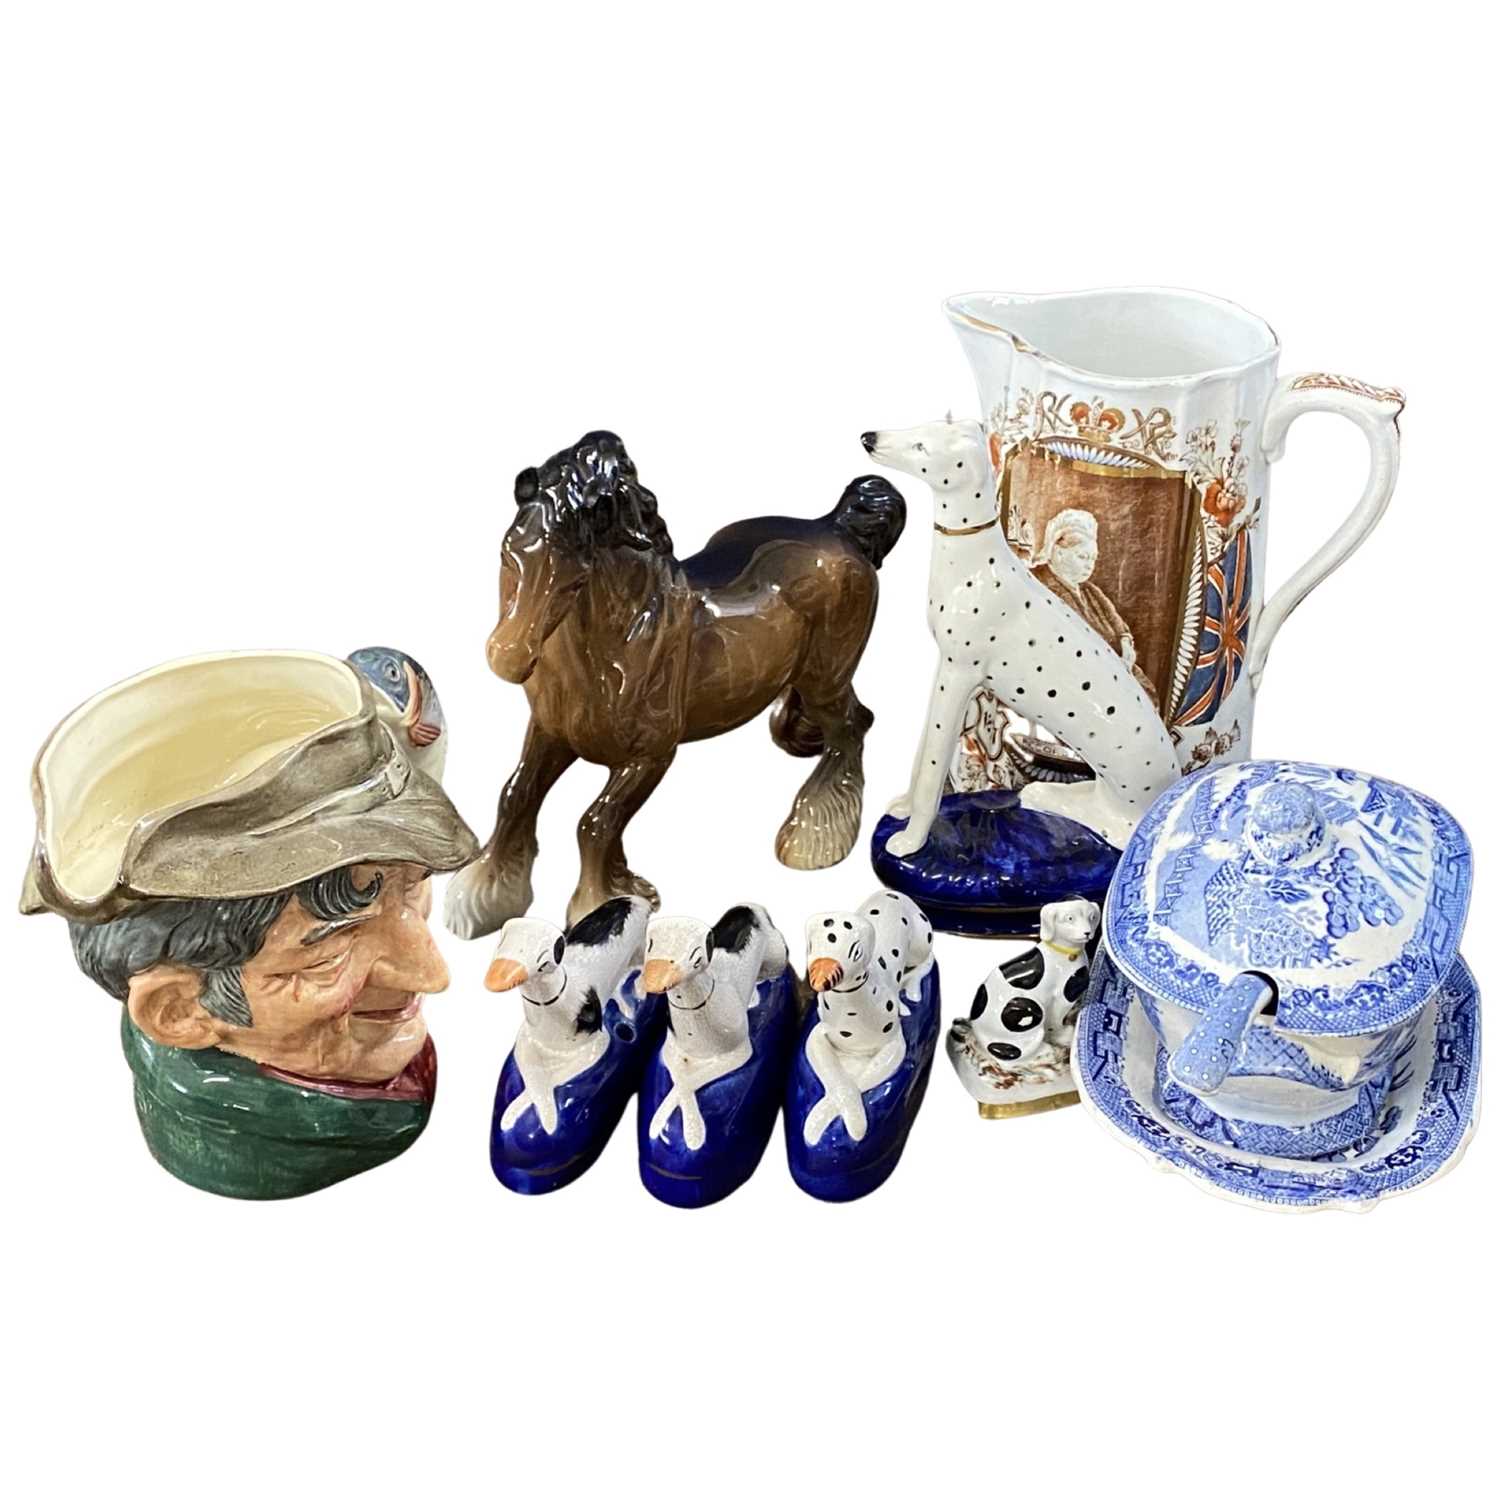 Group of ceramic items including a Beswick horse, Staffordshire blue terrine cover and stand with